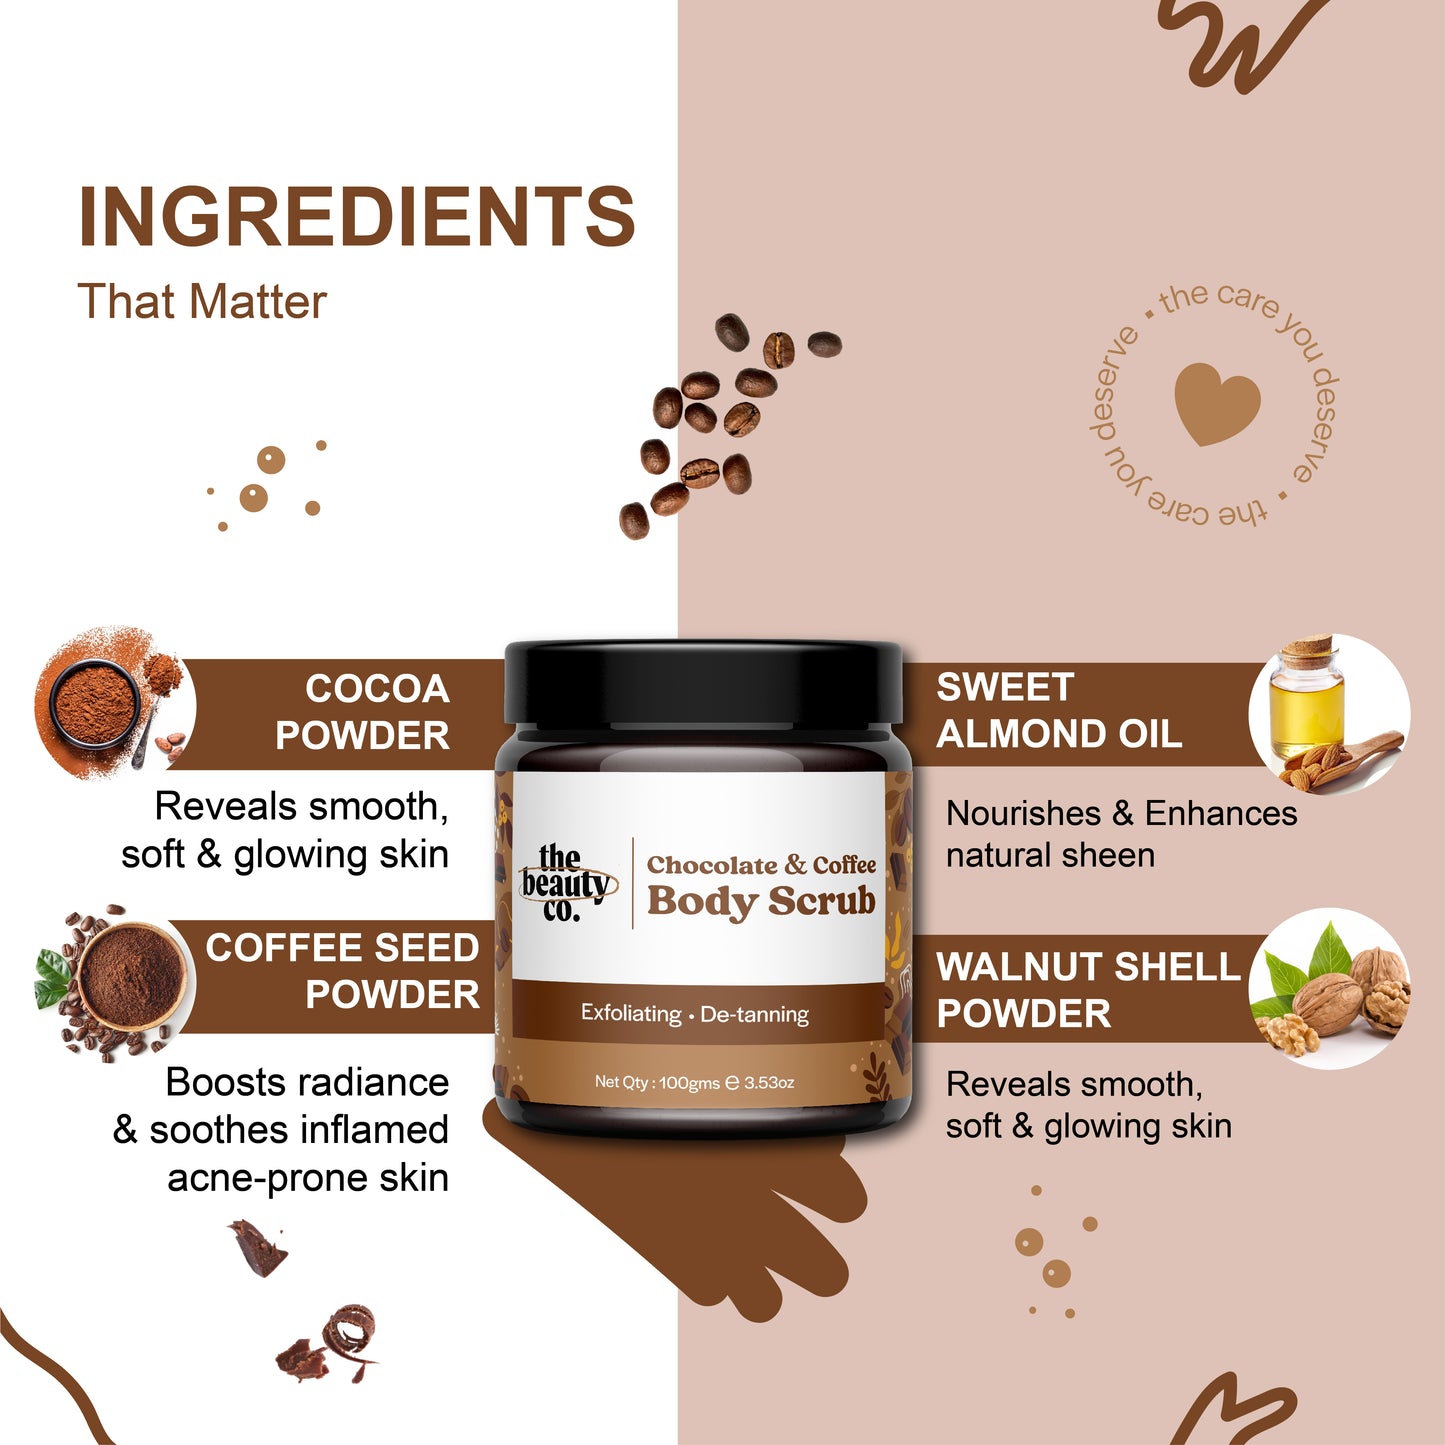 Choco Coffee Selfcare combo Body Scrub & Lotion + French Lavender Essential Oil